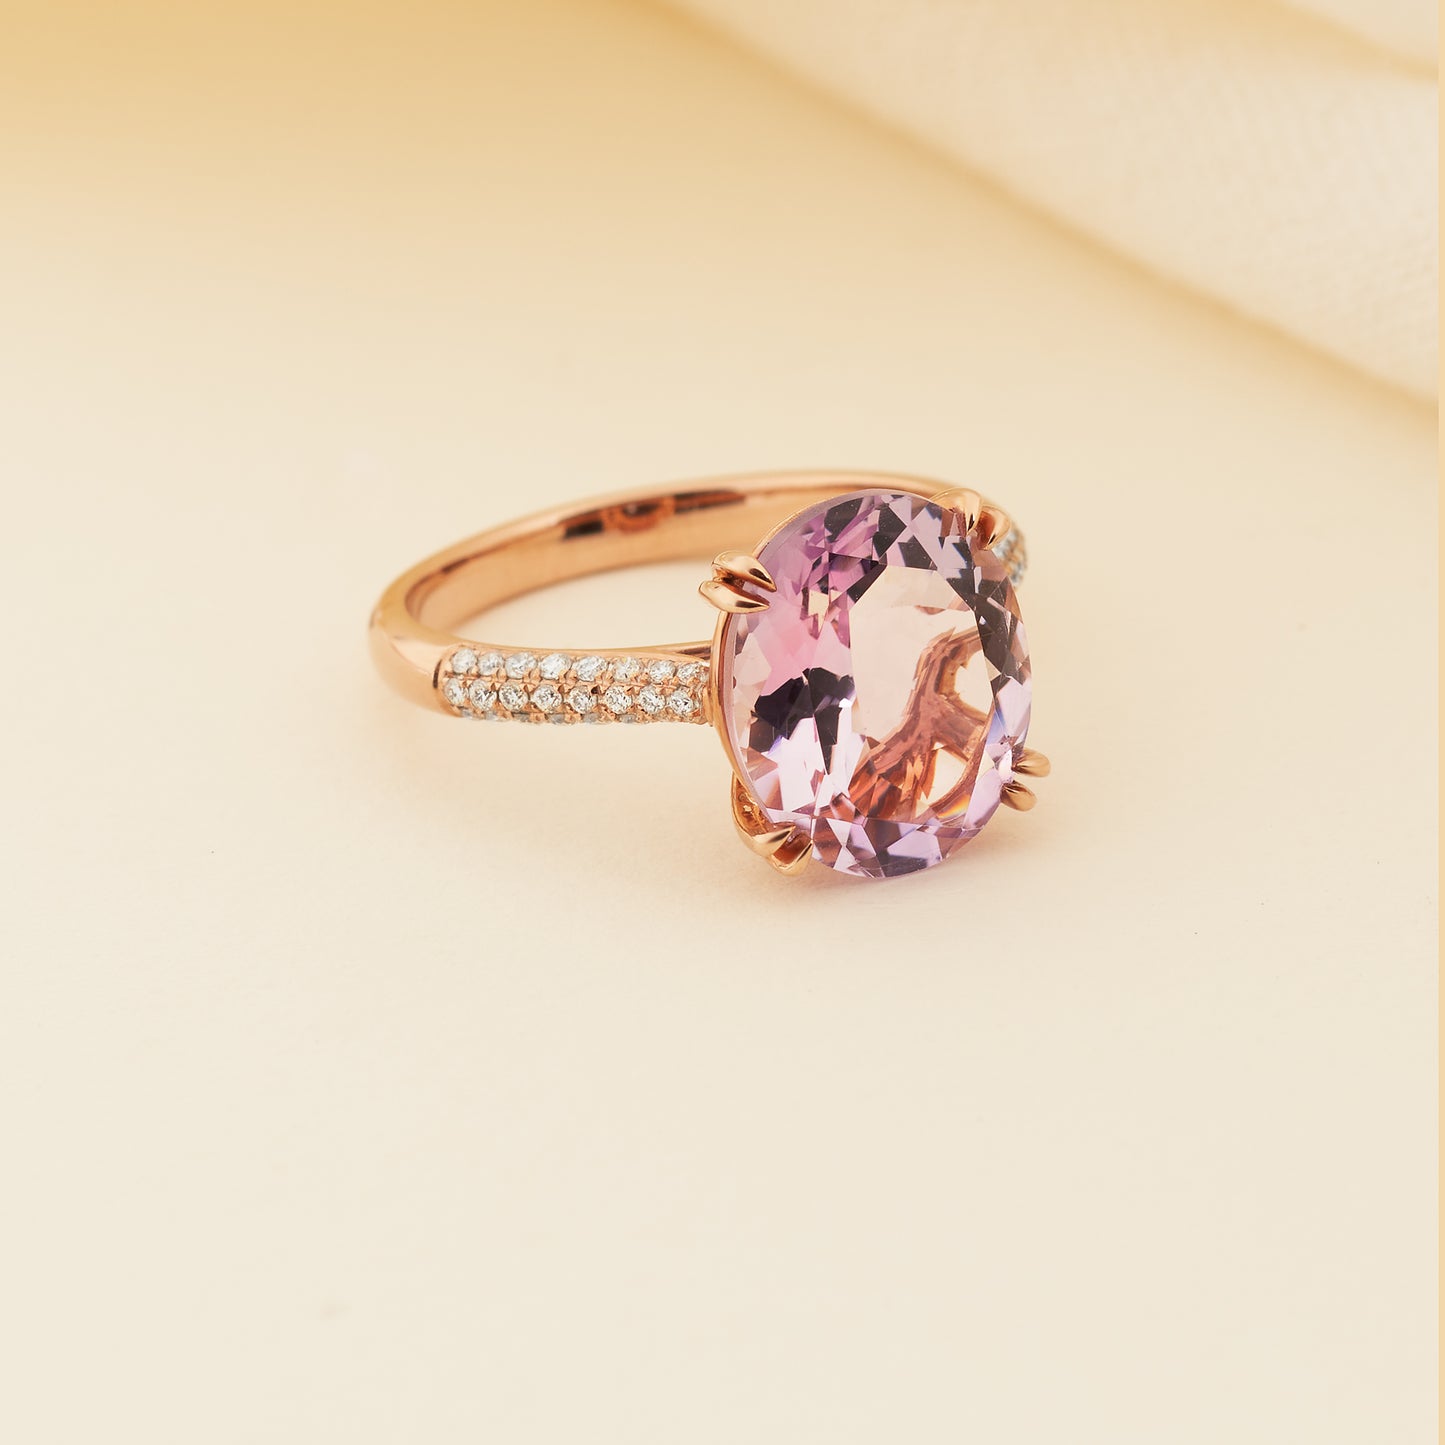 9K Rose Gold 12x10 mm Oval Pink Amethyst Pave Diamond Cocktail Ring